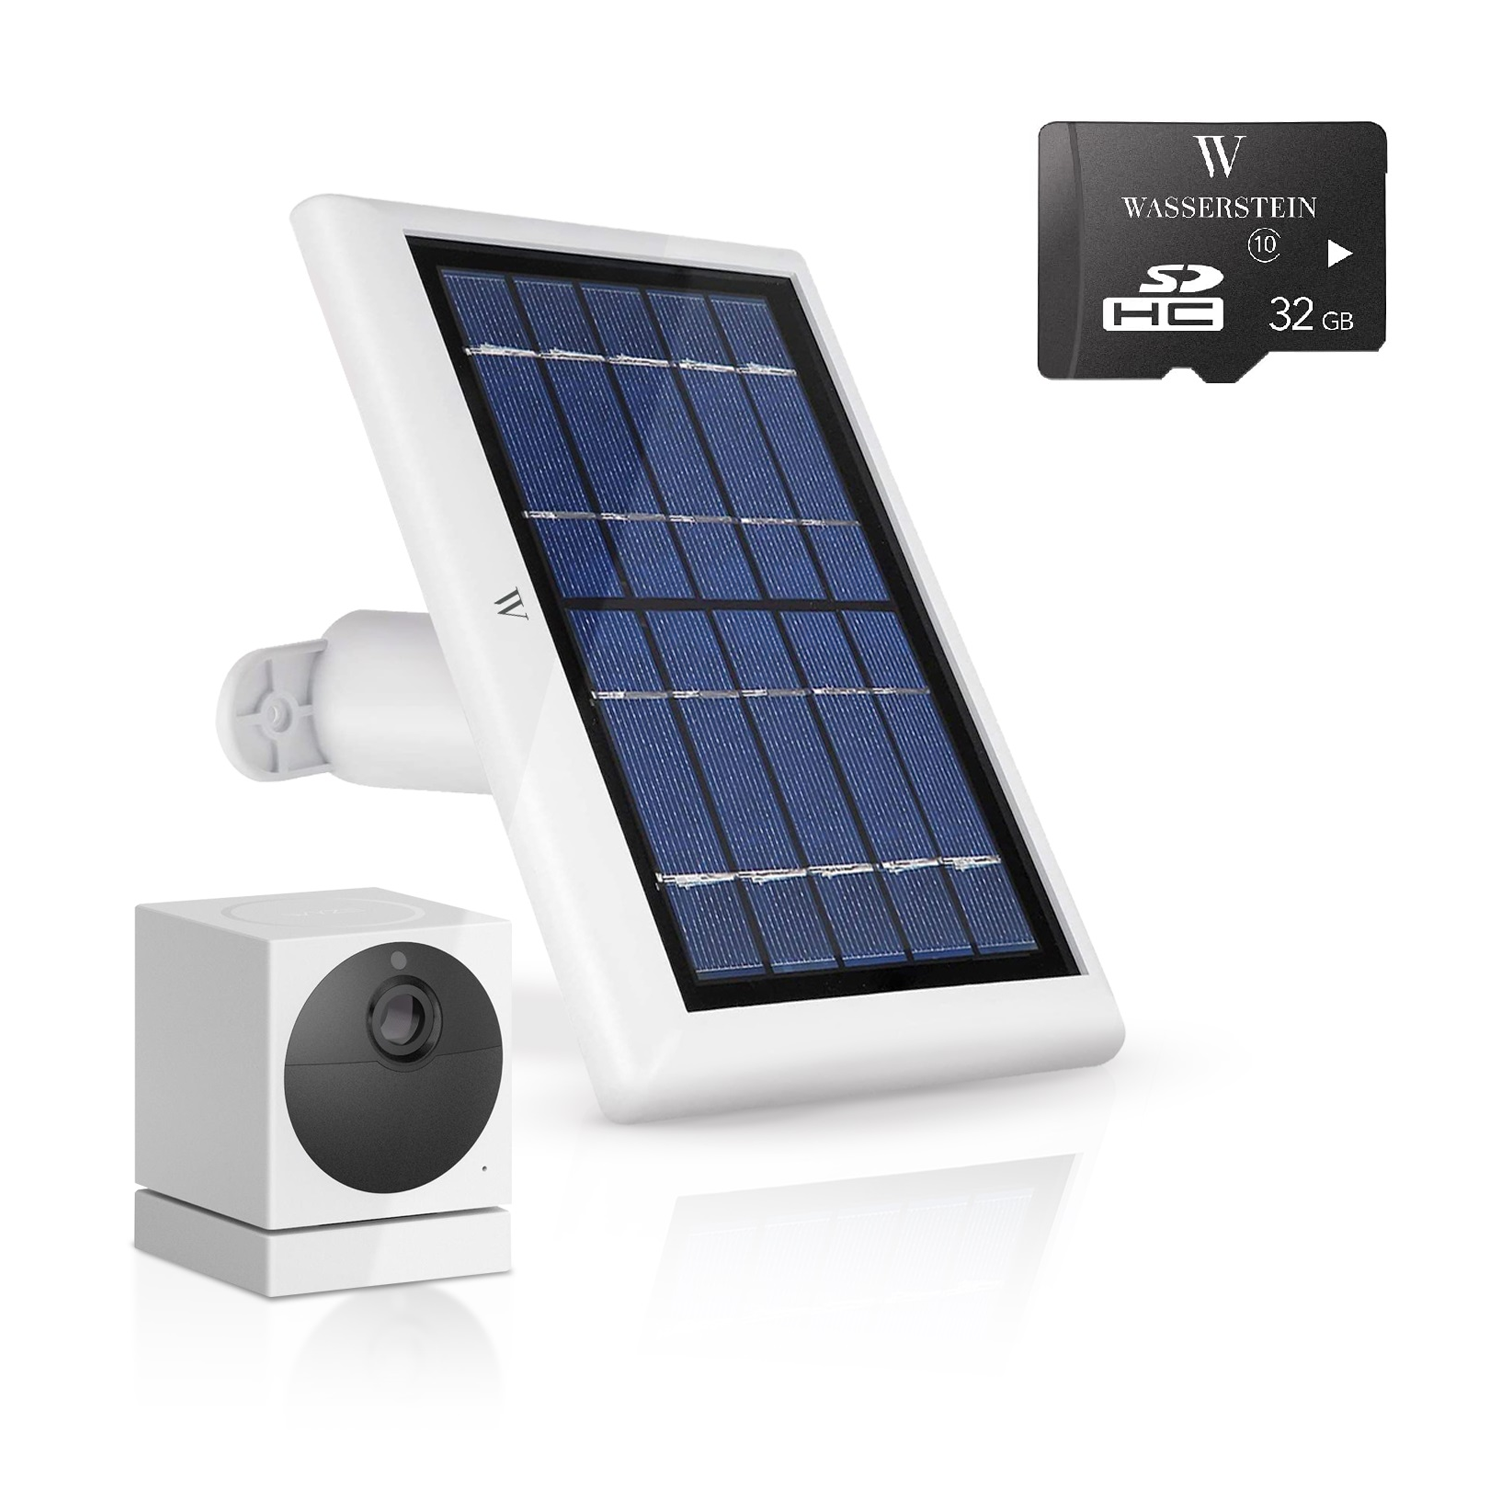 Constitute sunlight shore Wasserstein Wyze Cam Outdoor and 32GB Micro SD Card White Solar Panel in  the Security Camera Accessories department at Lowes.com